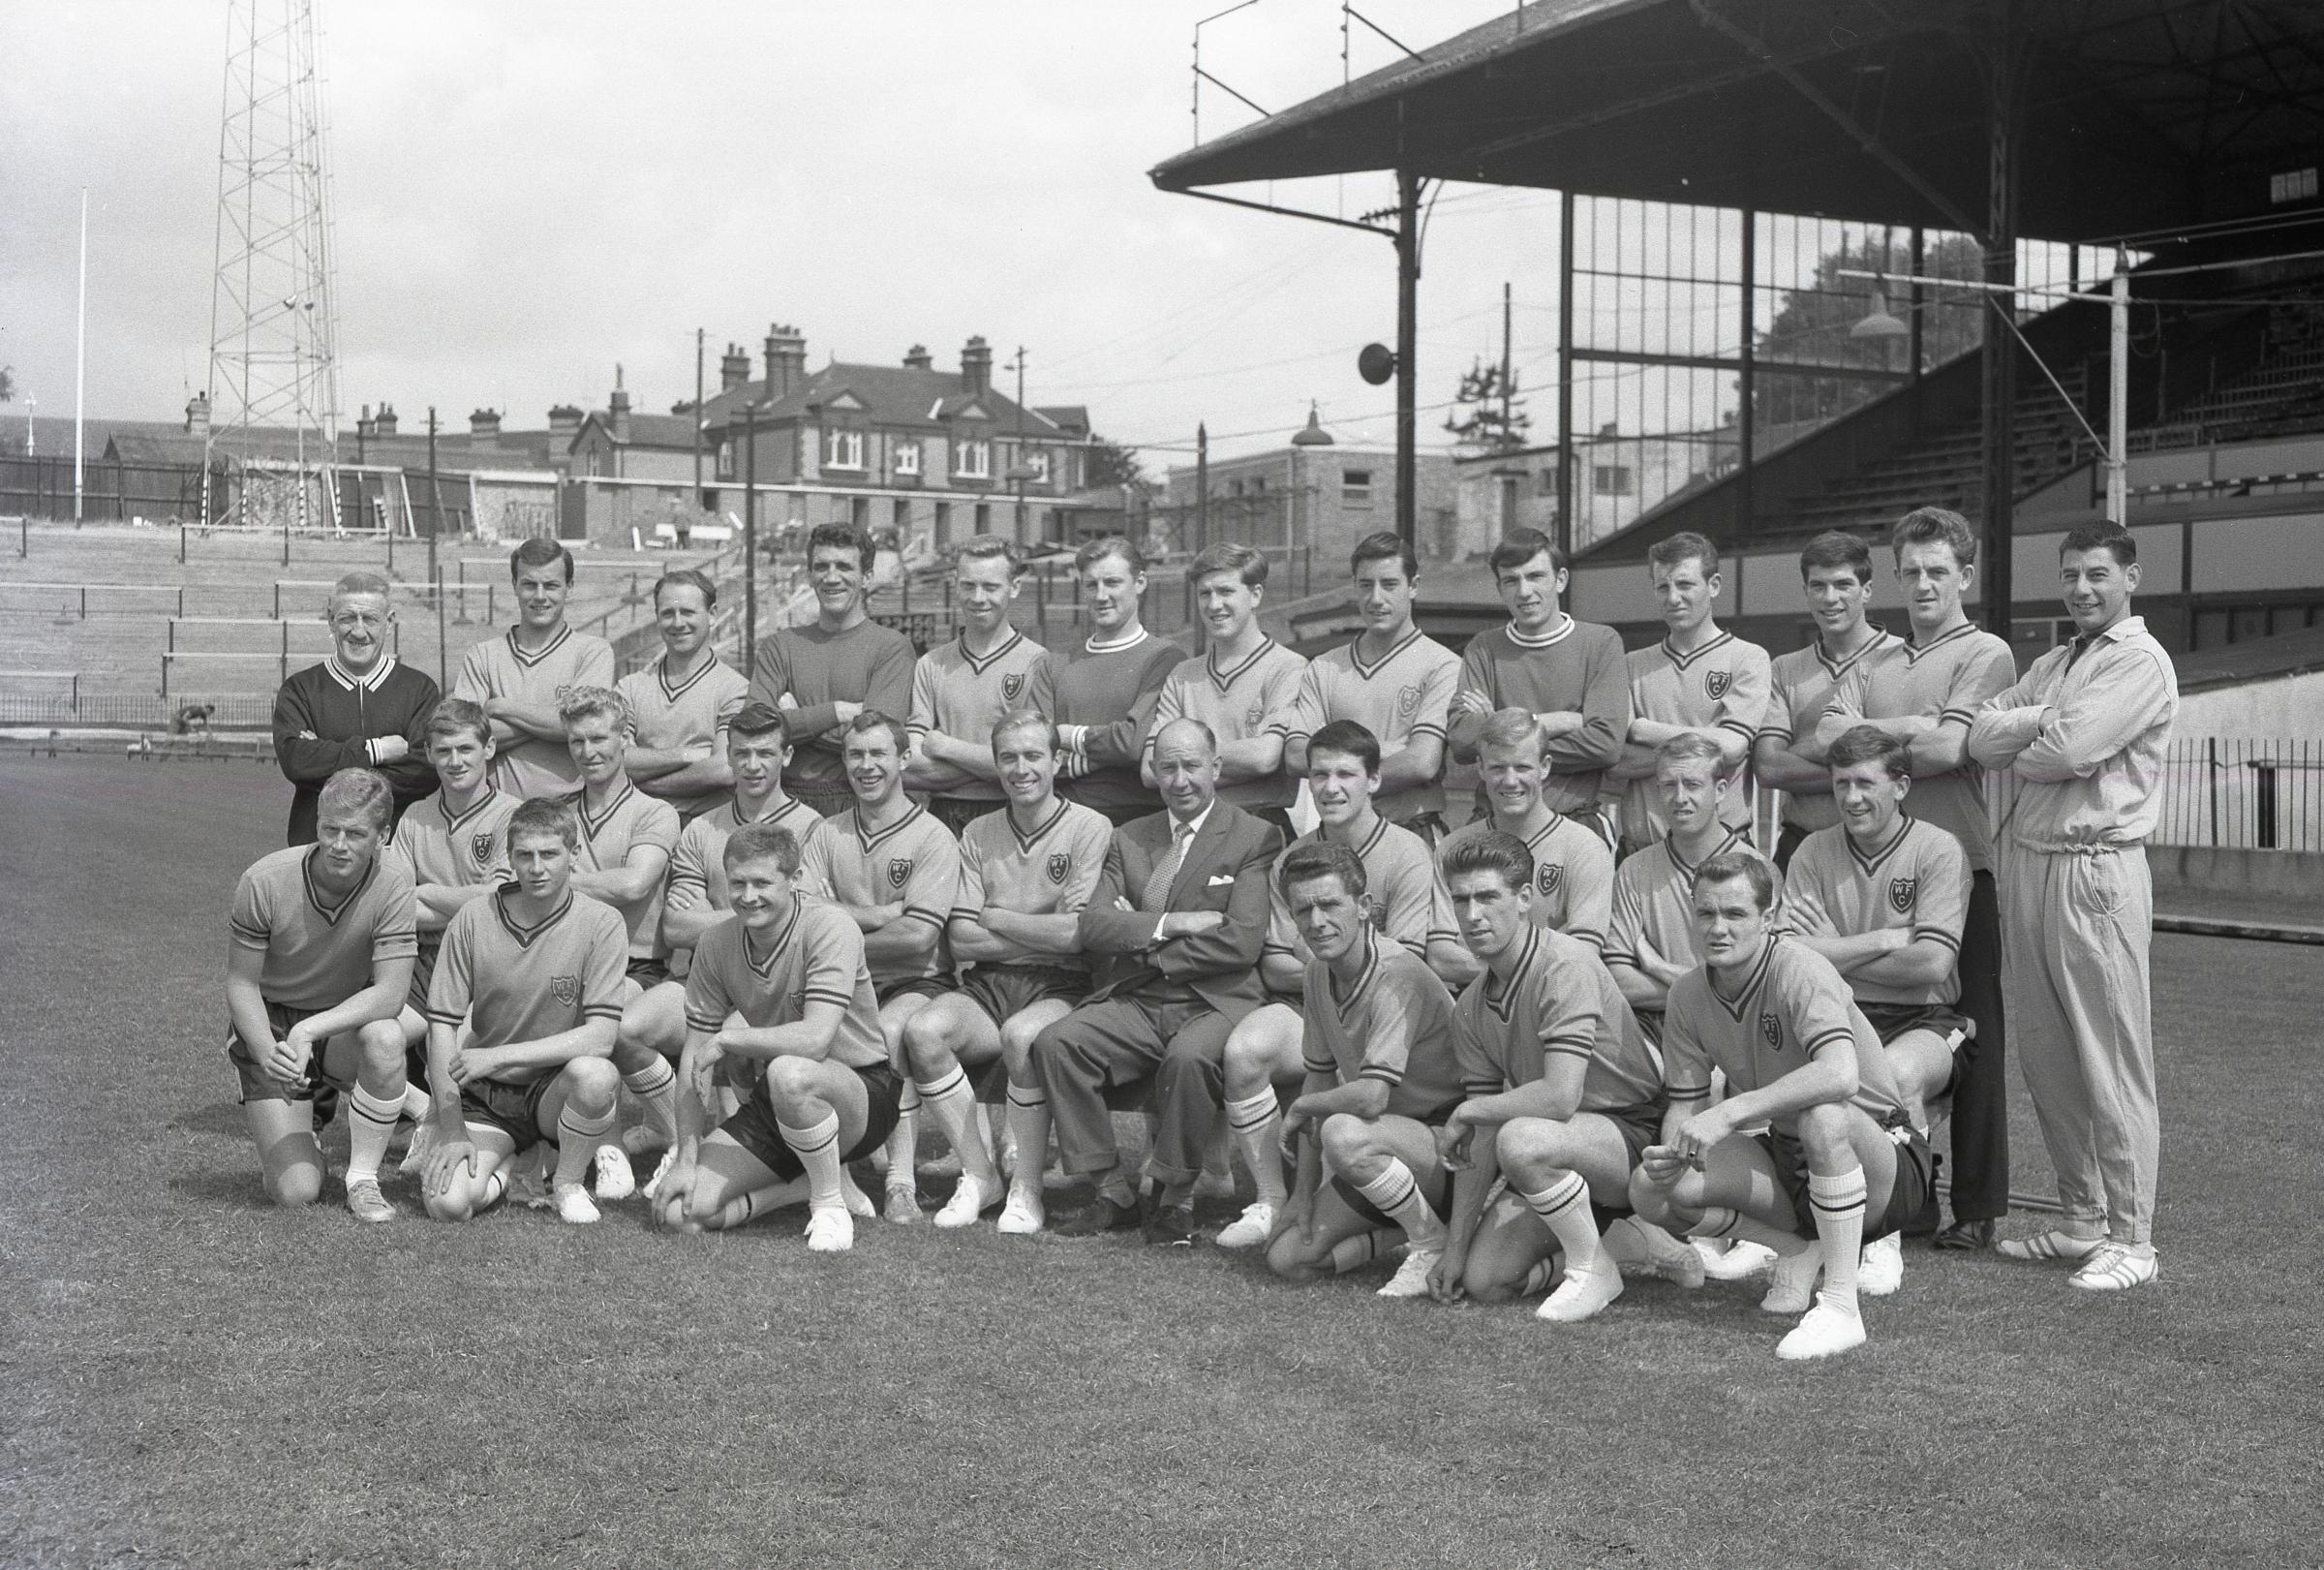 The Watford squad in pre-season ahead of the 1962/63 campaign